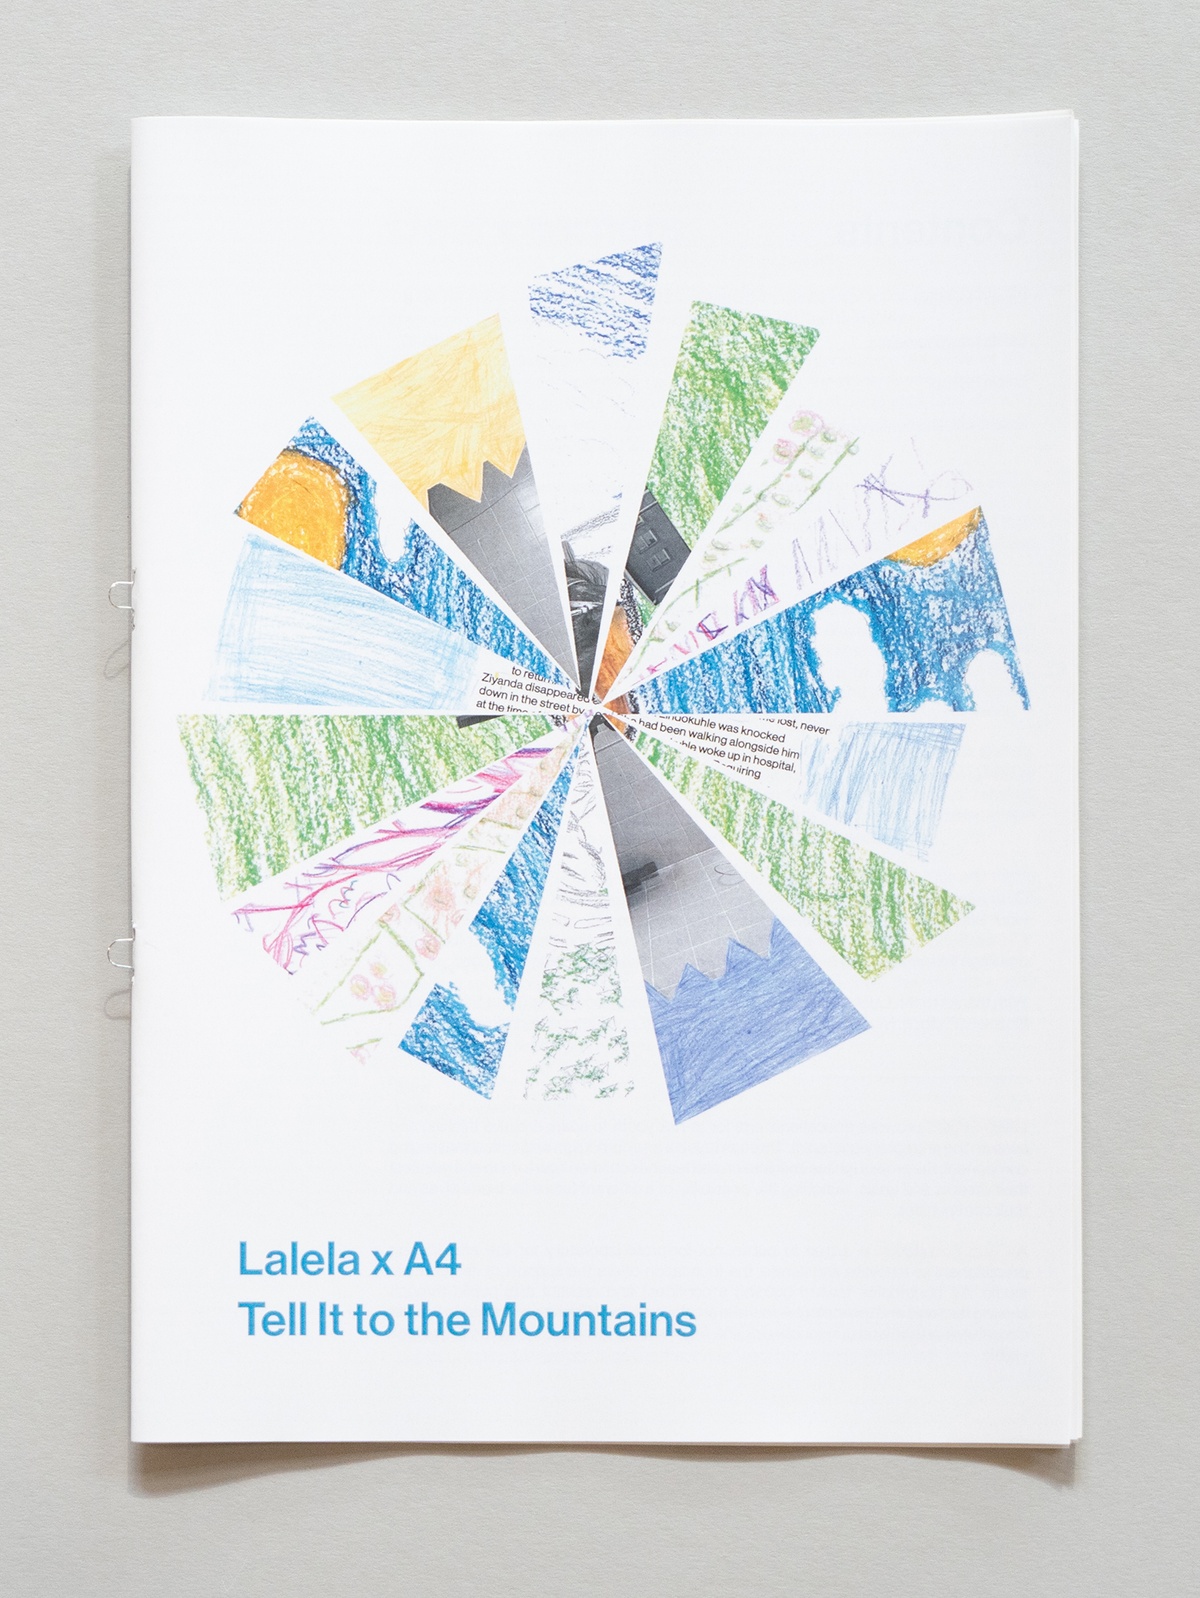 A top-down photograph of the publication for the Lalela programme's interaction with the Tell It to the Mountains exhibition in A4's Gallery.
